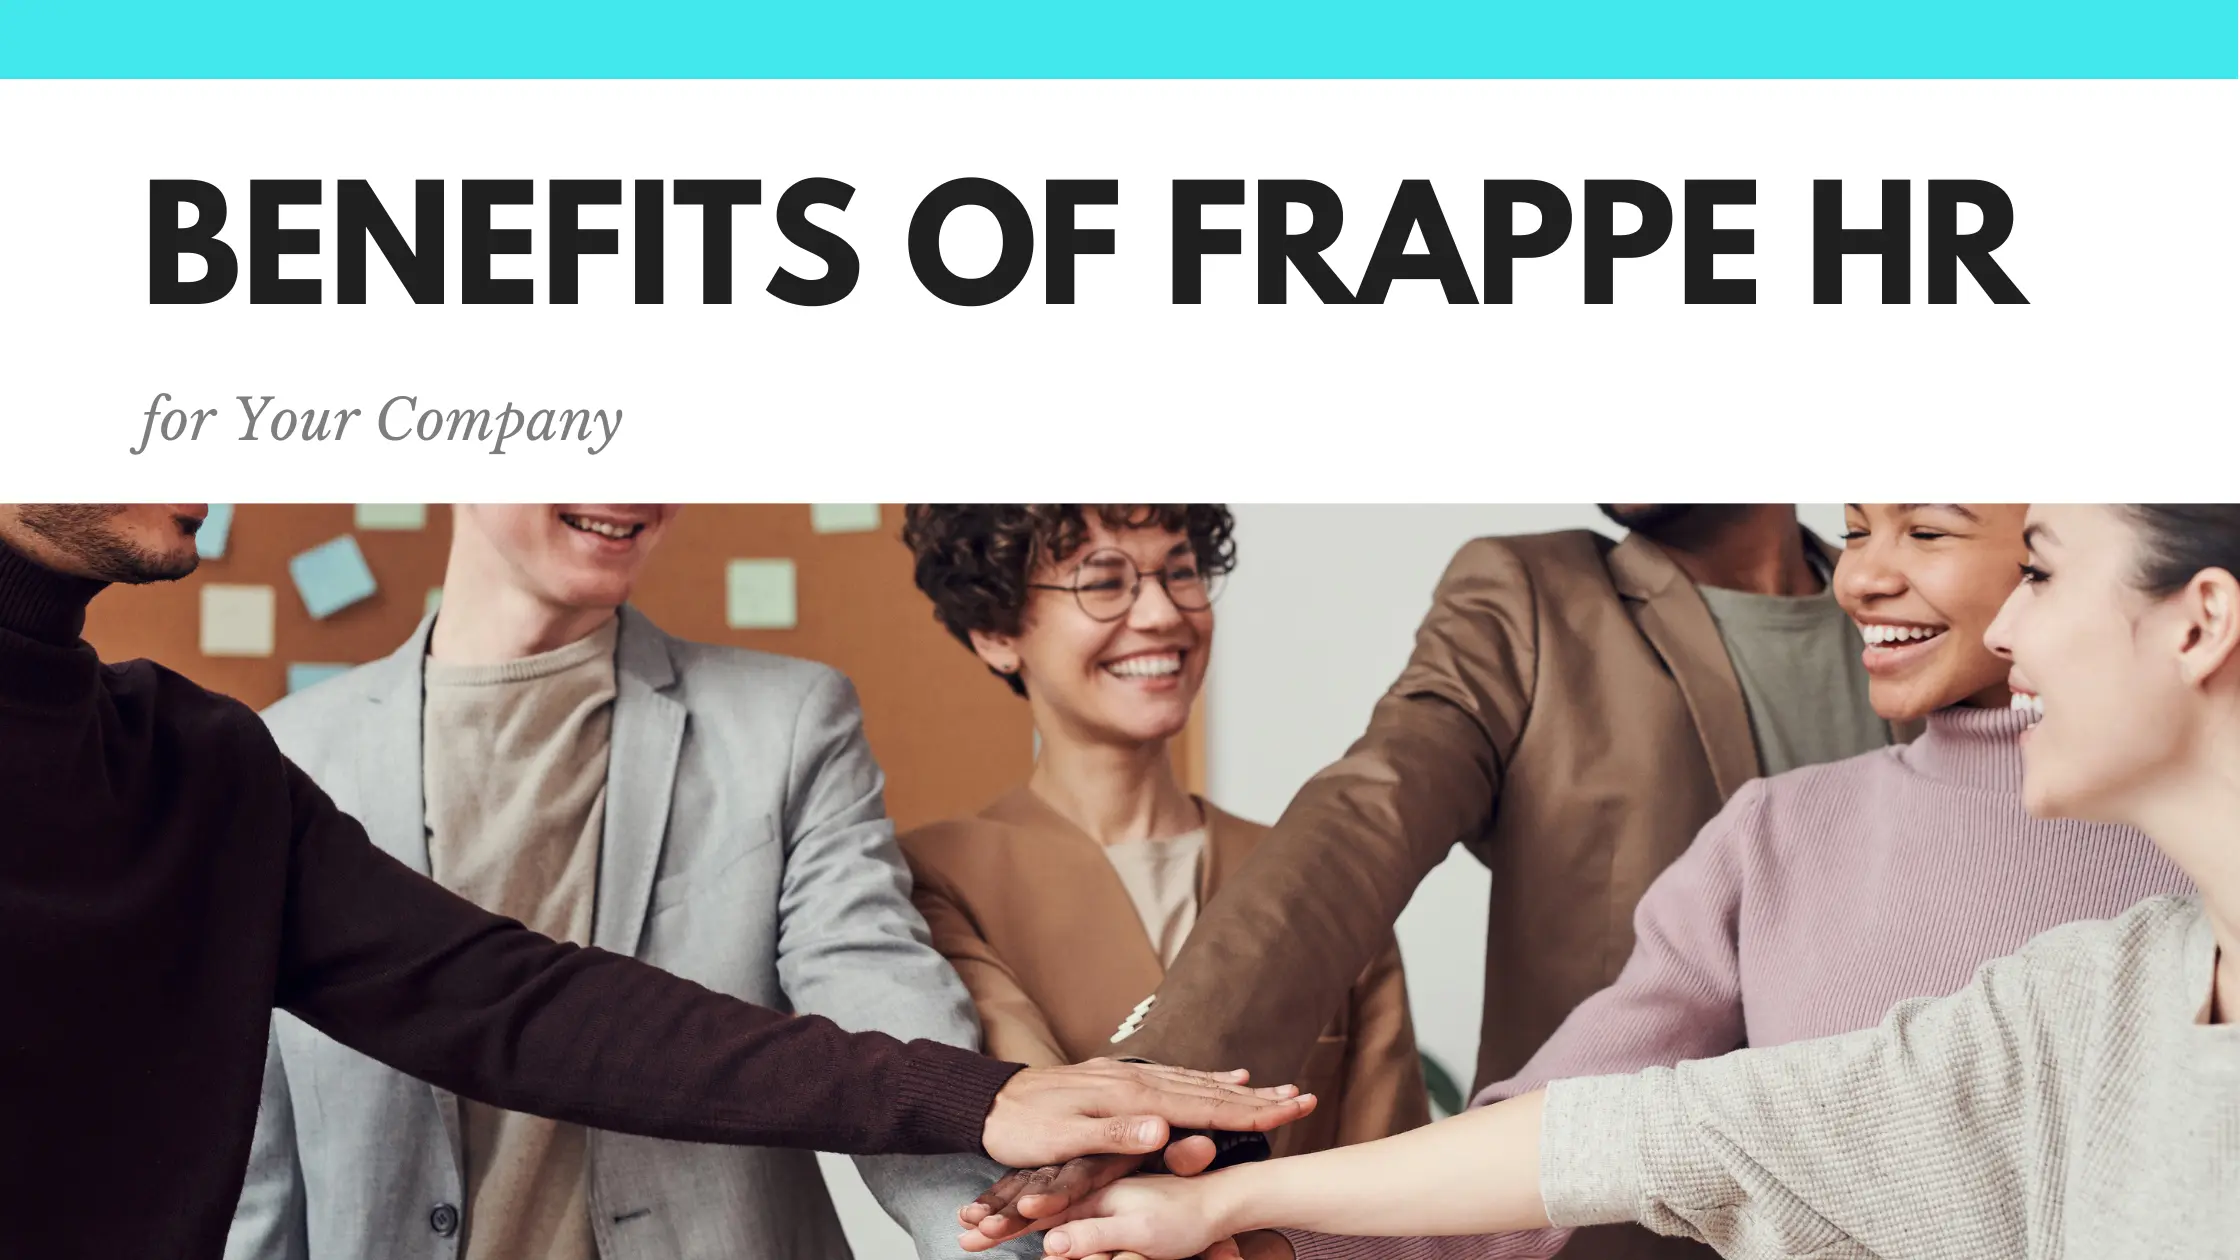 Convince Your Boss To Implement Frappe HR